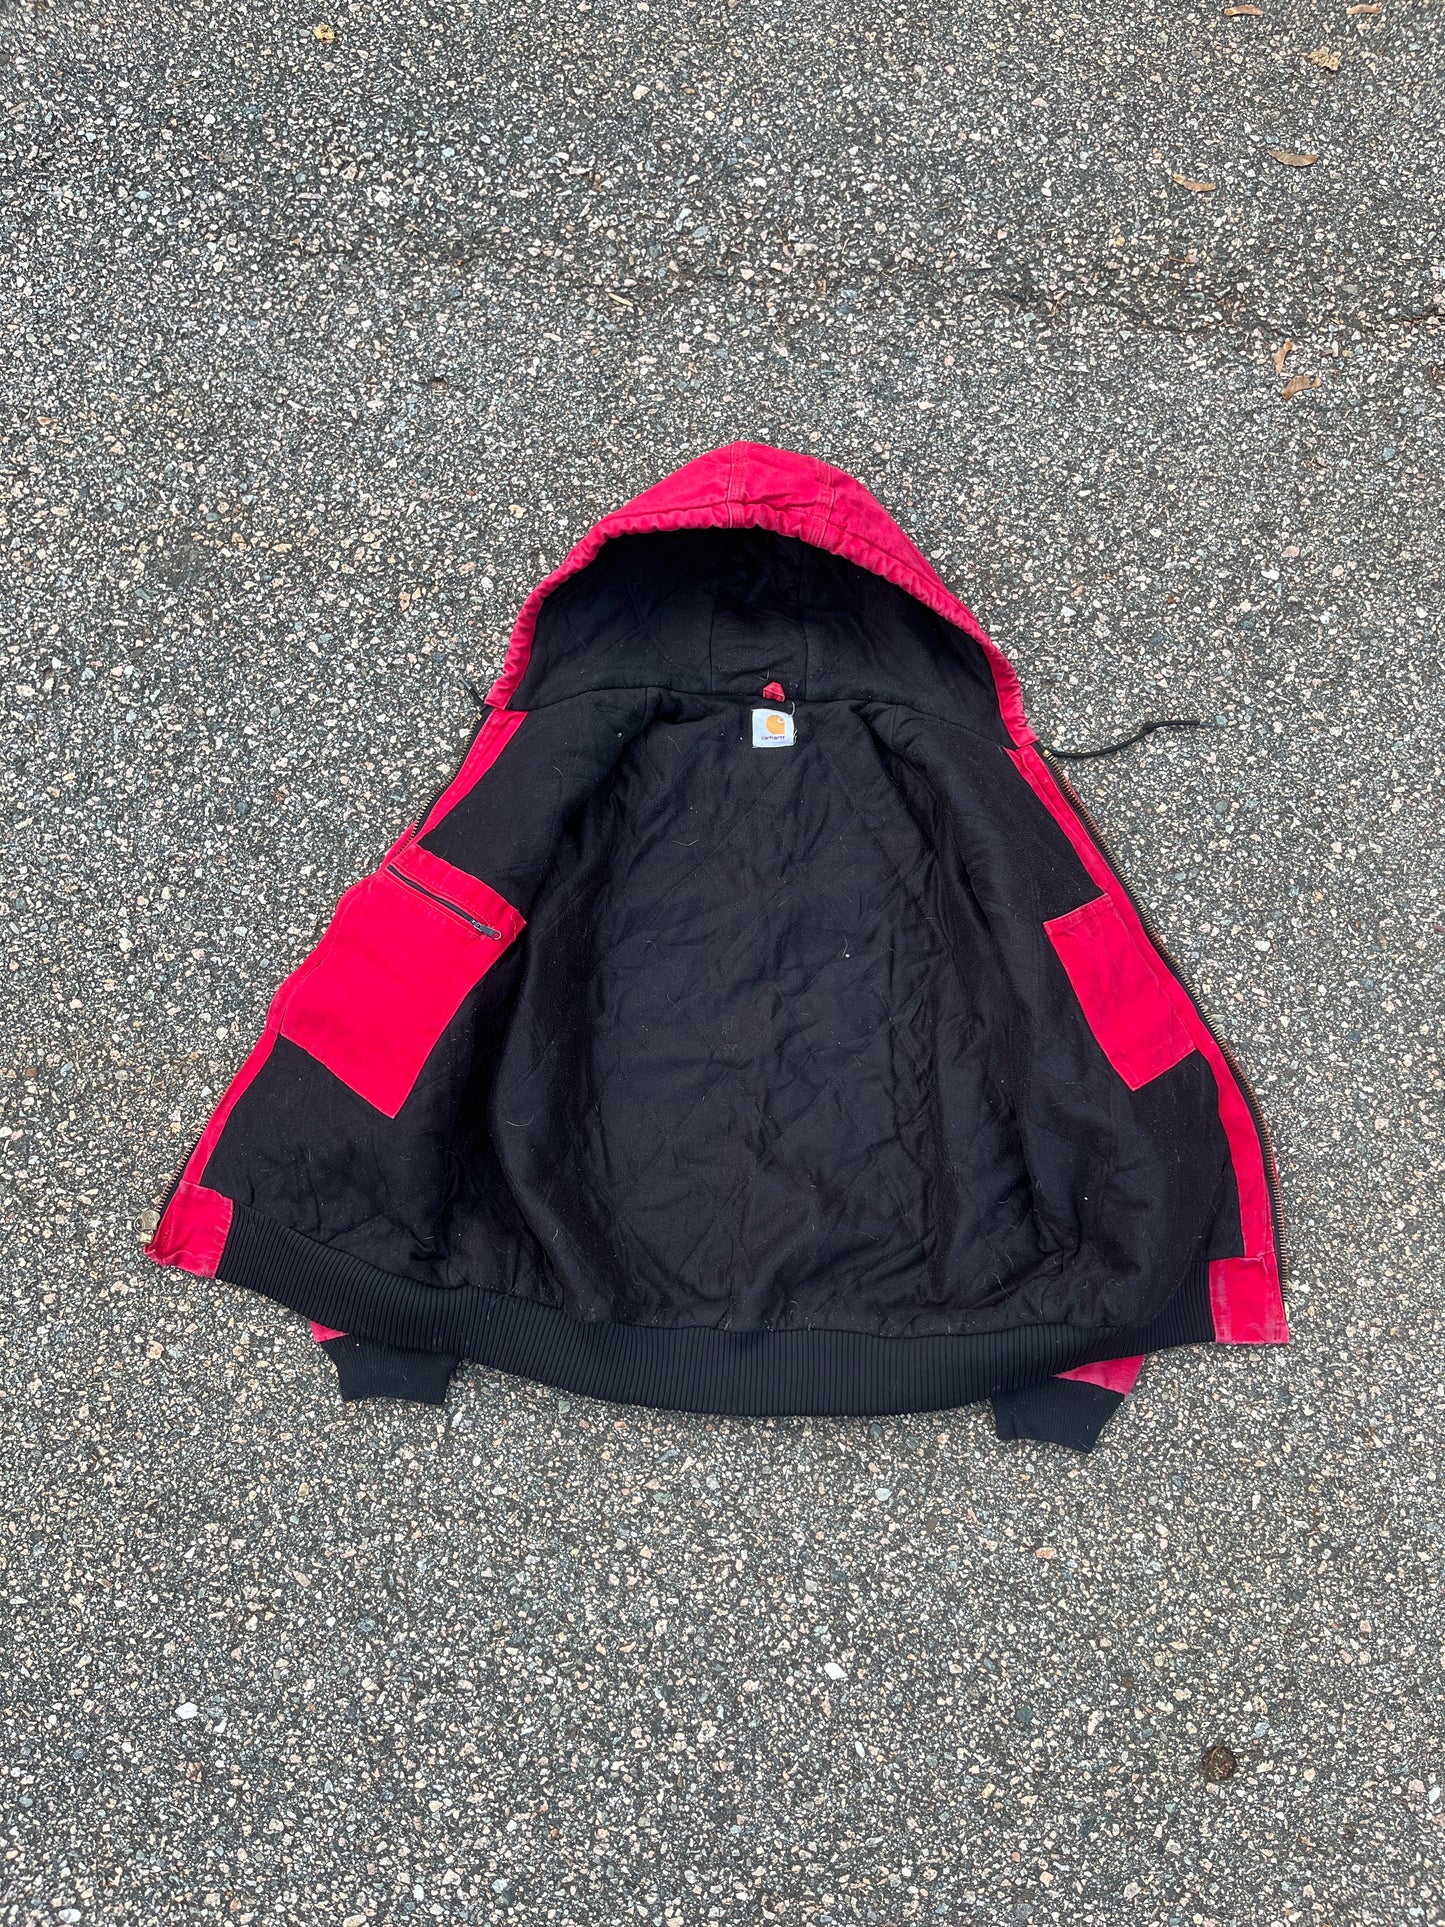 Faded Strawberry Red Carhartt Active Jacket - Large